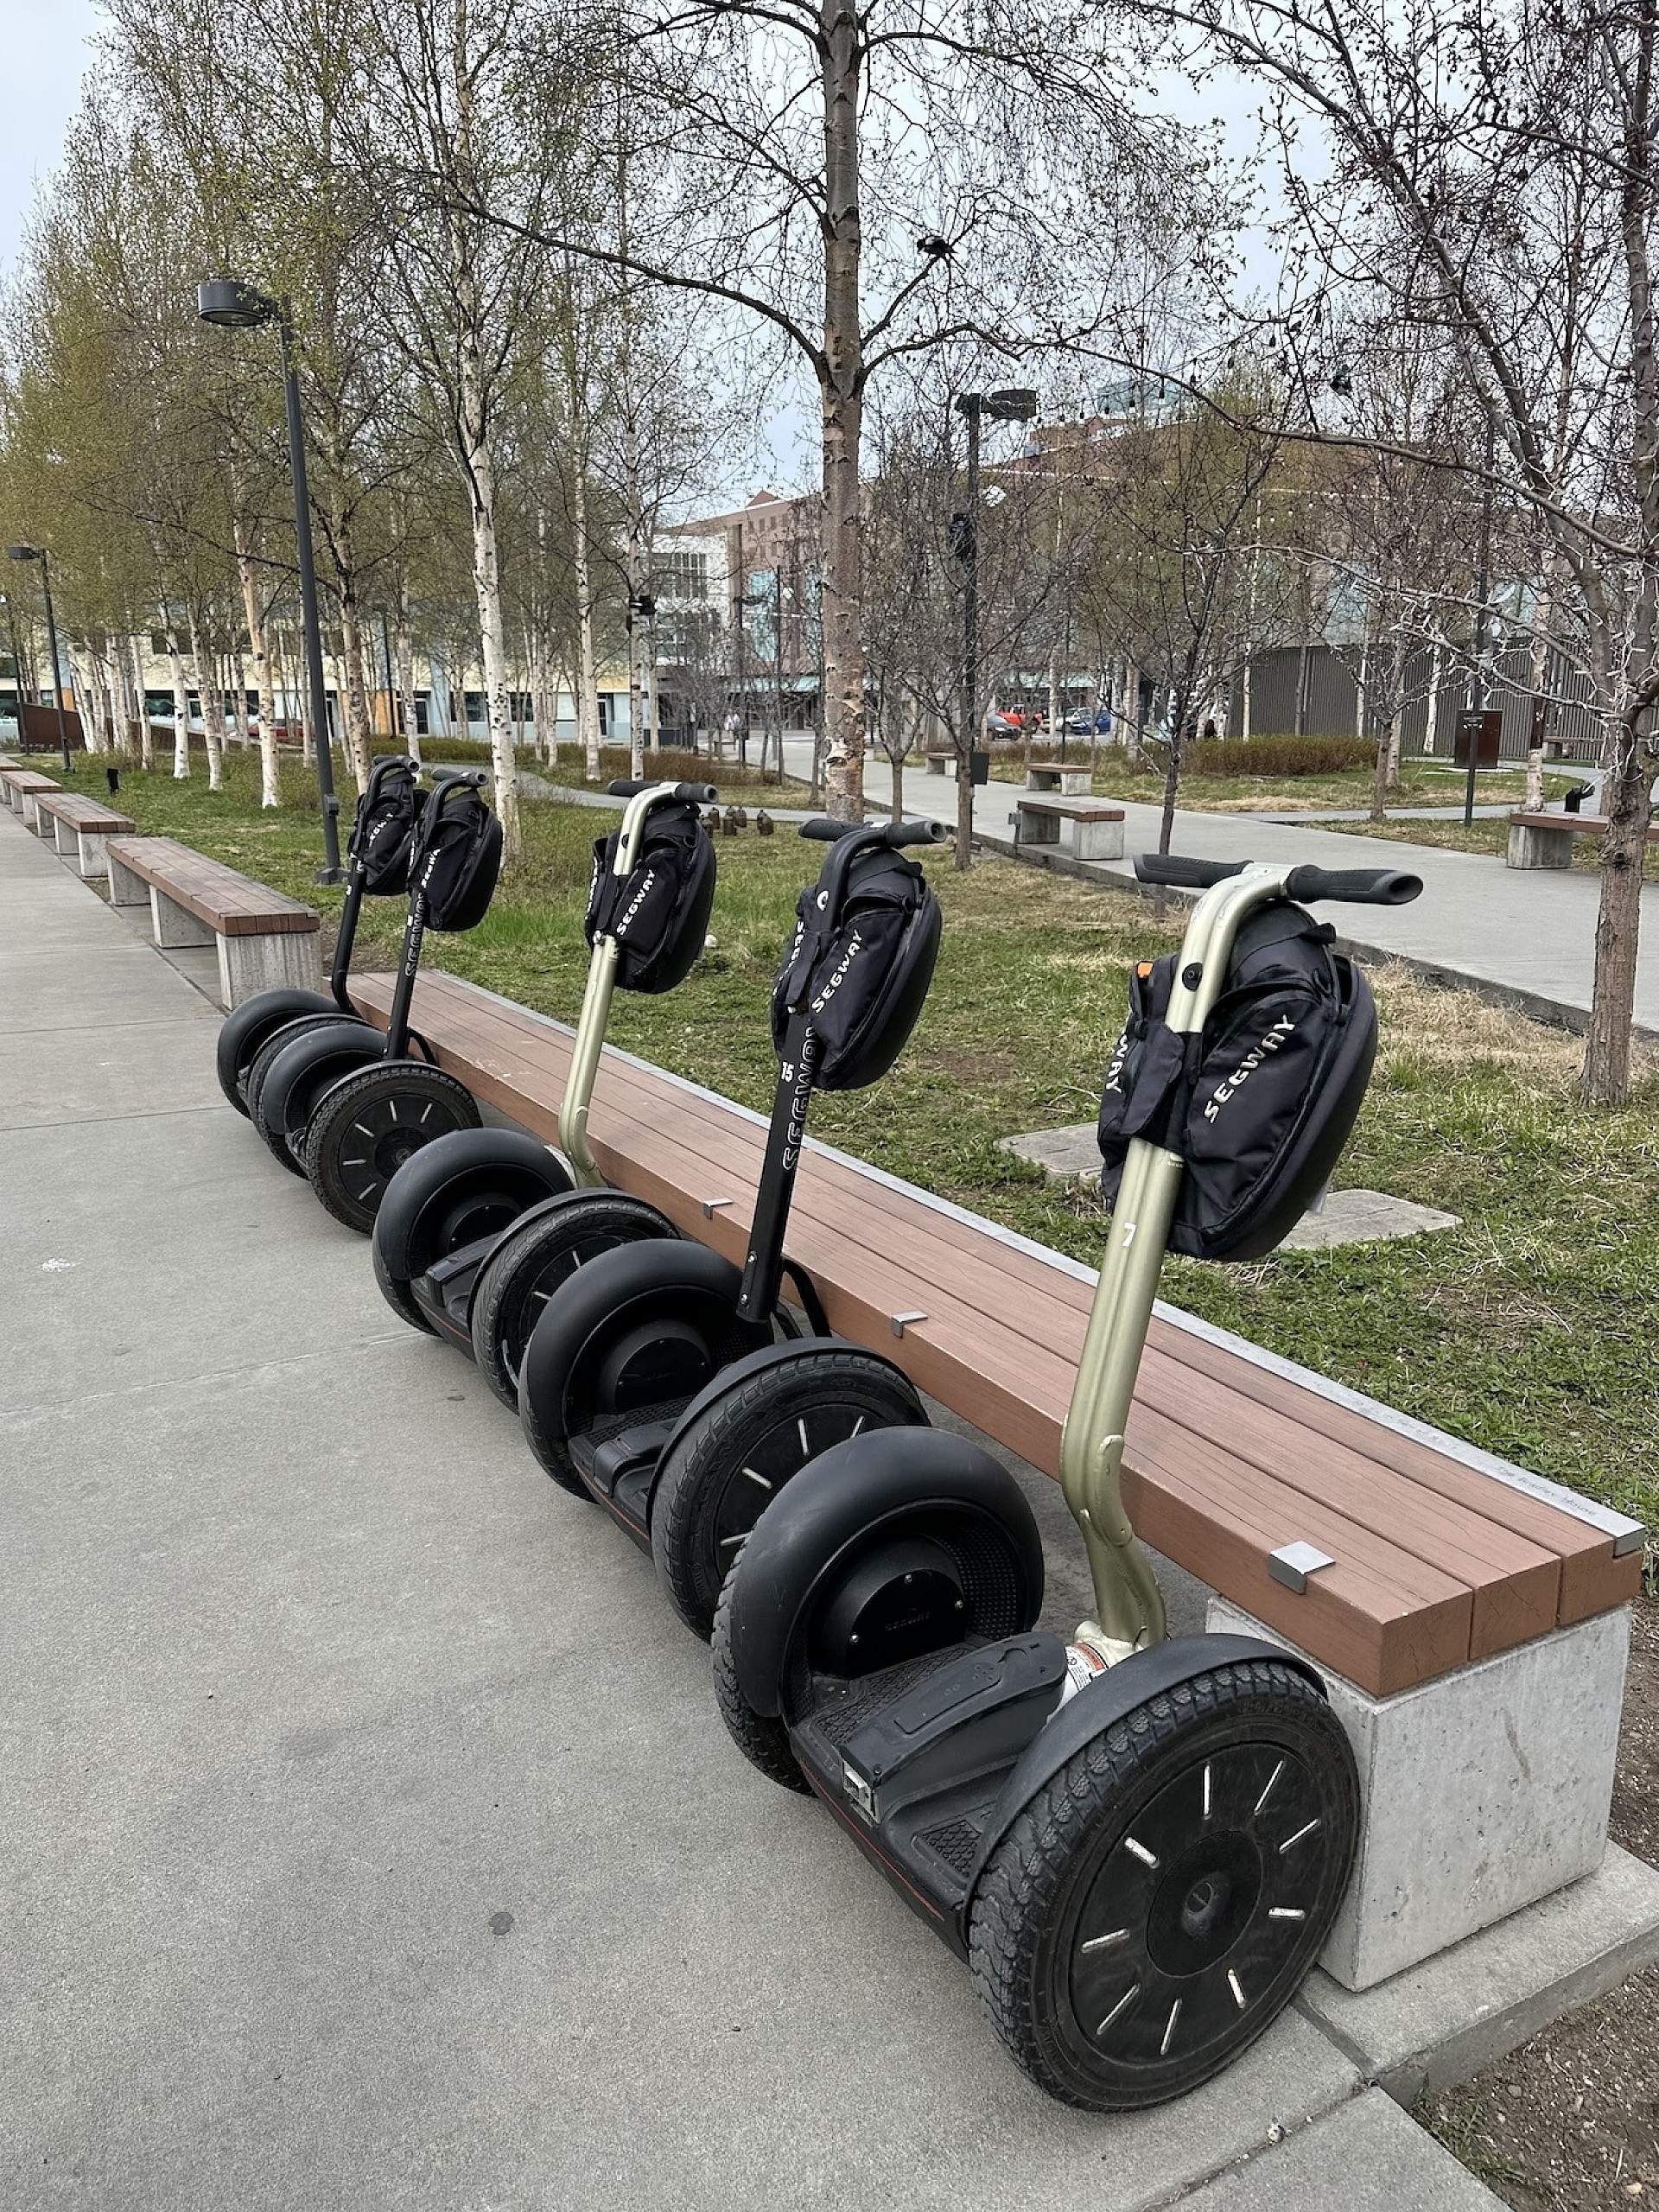 A group of Segways line a bench in Anchorage, Alaska.